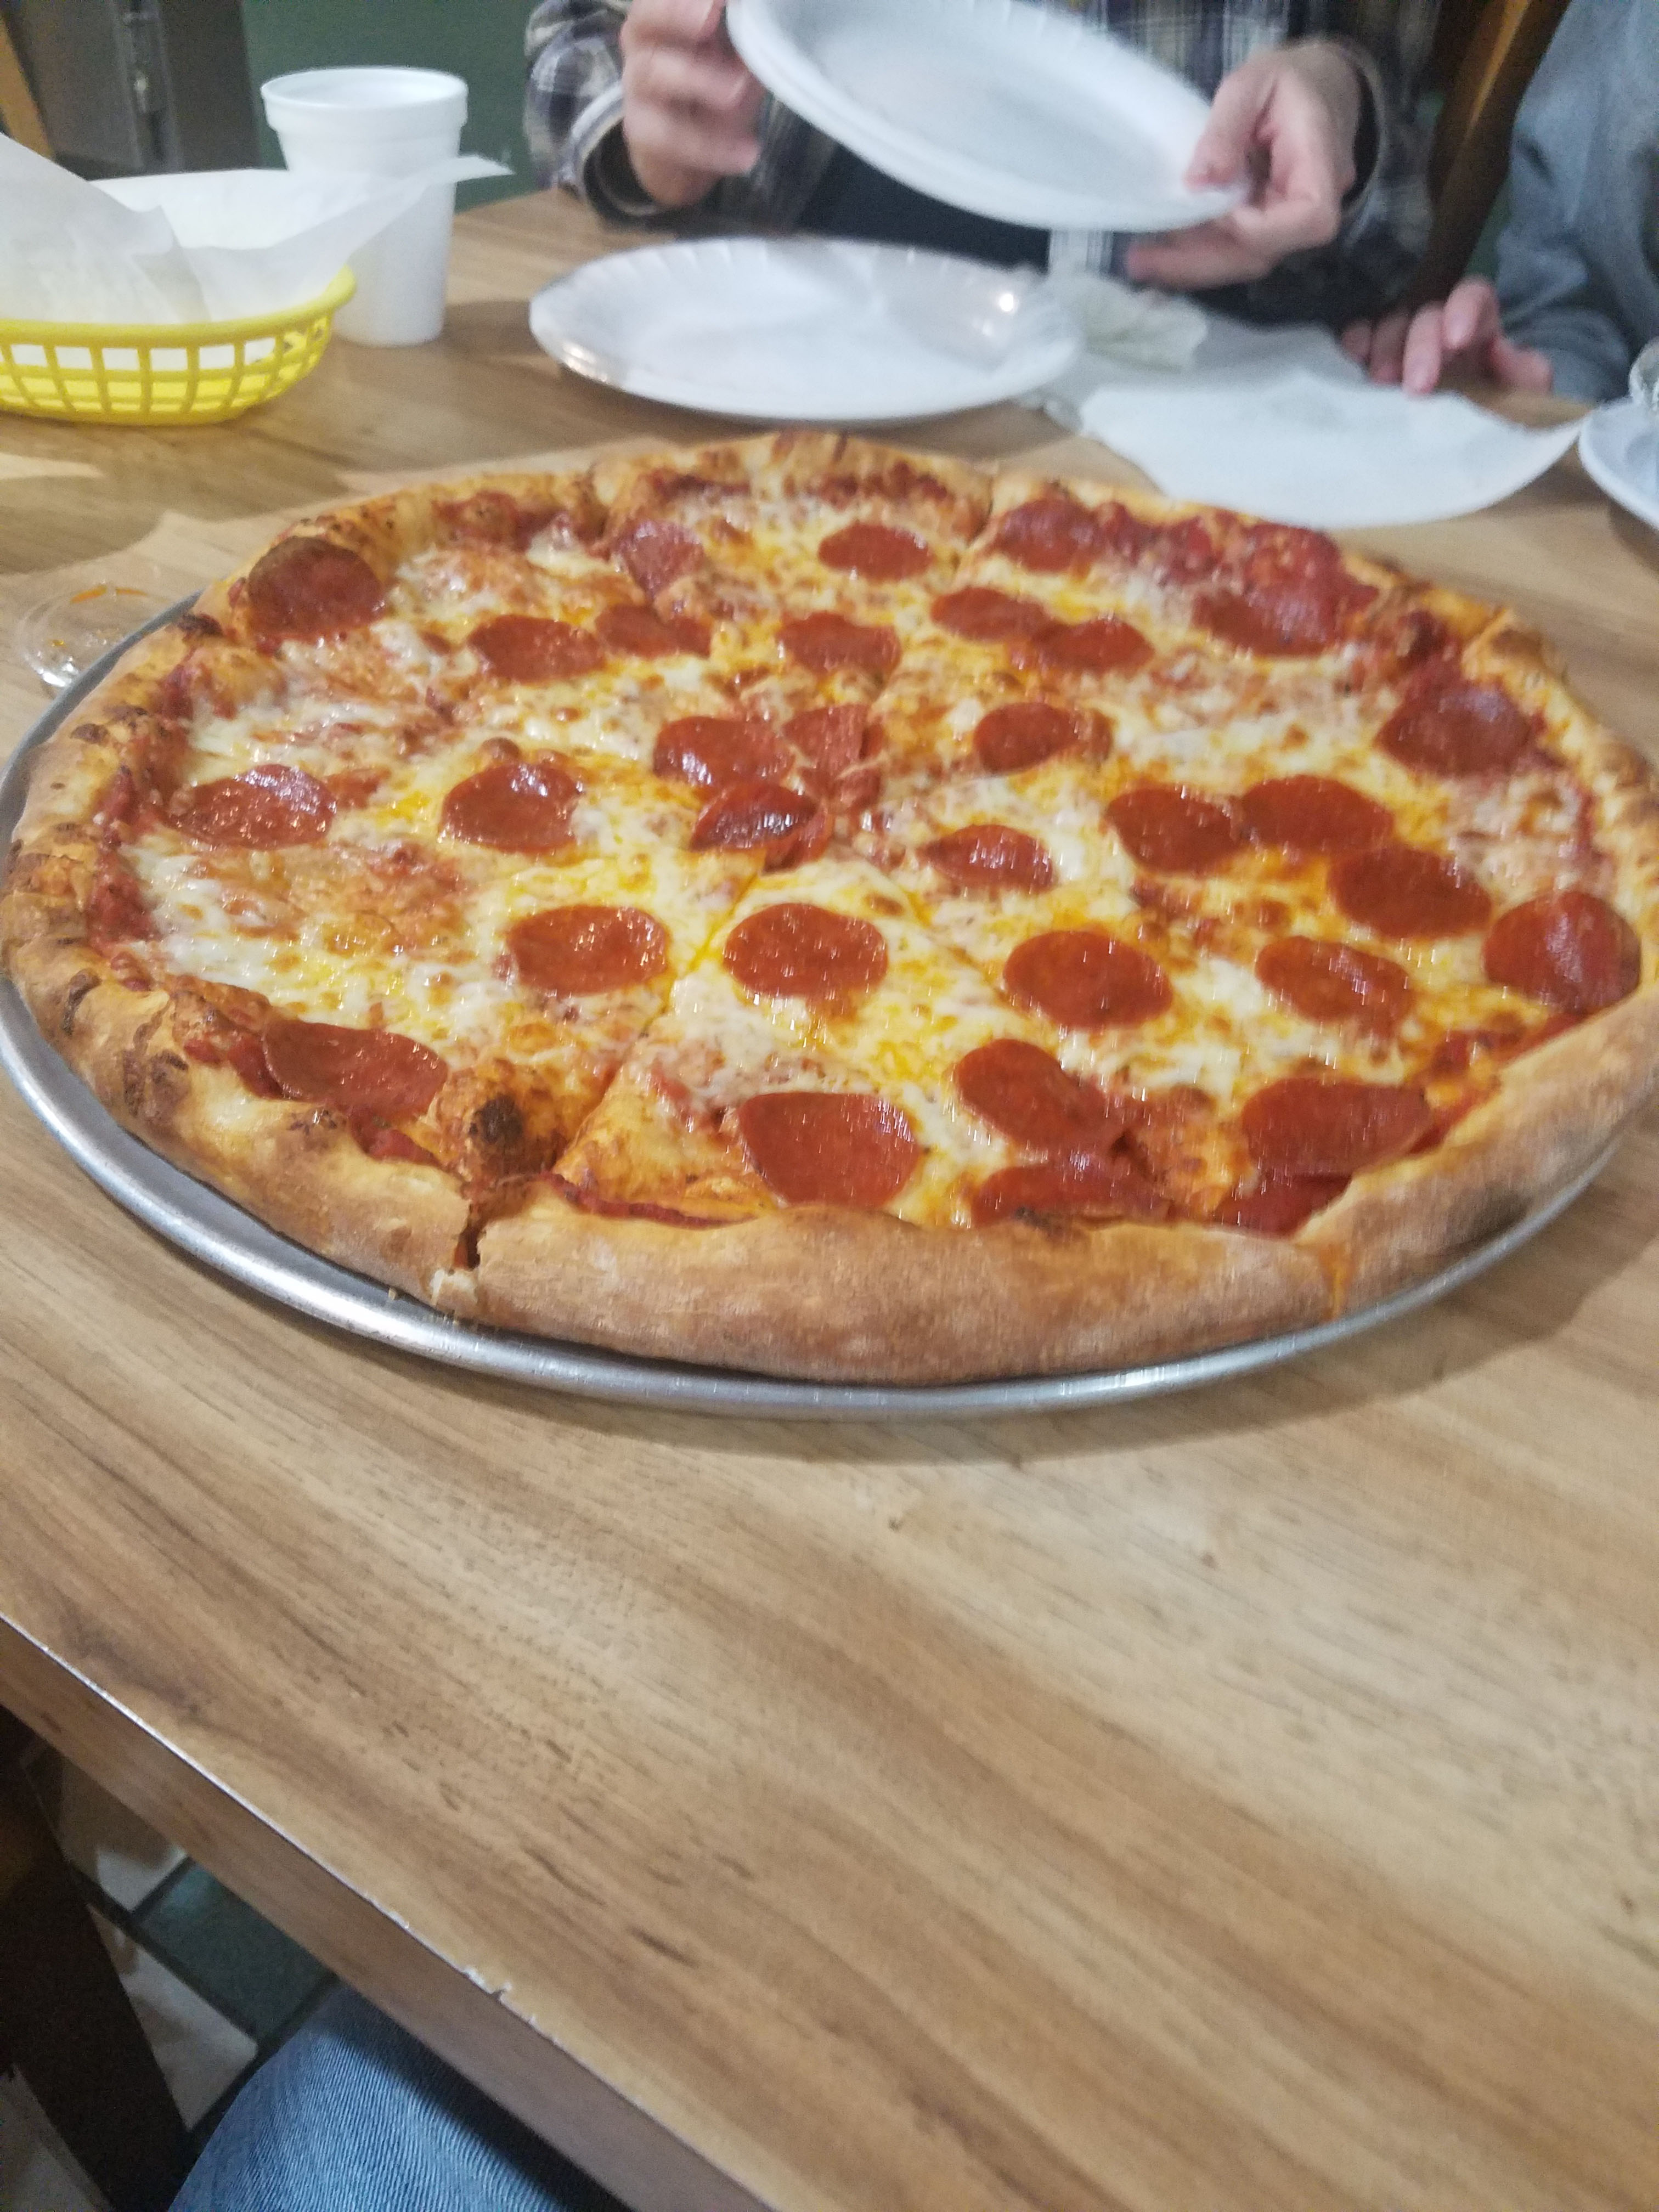 Tony’s Giant Pizzeria & Grill Review